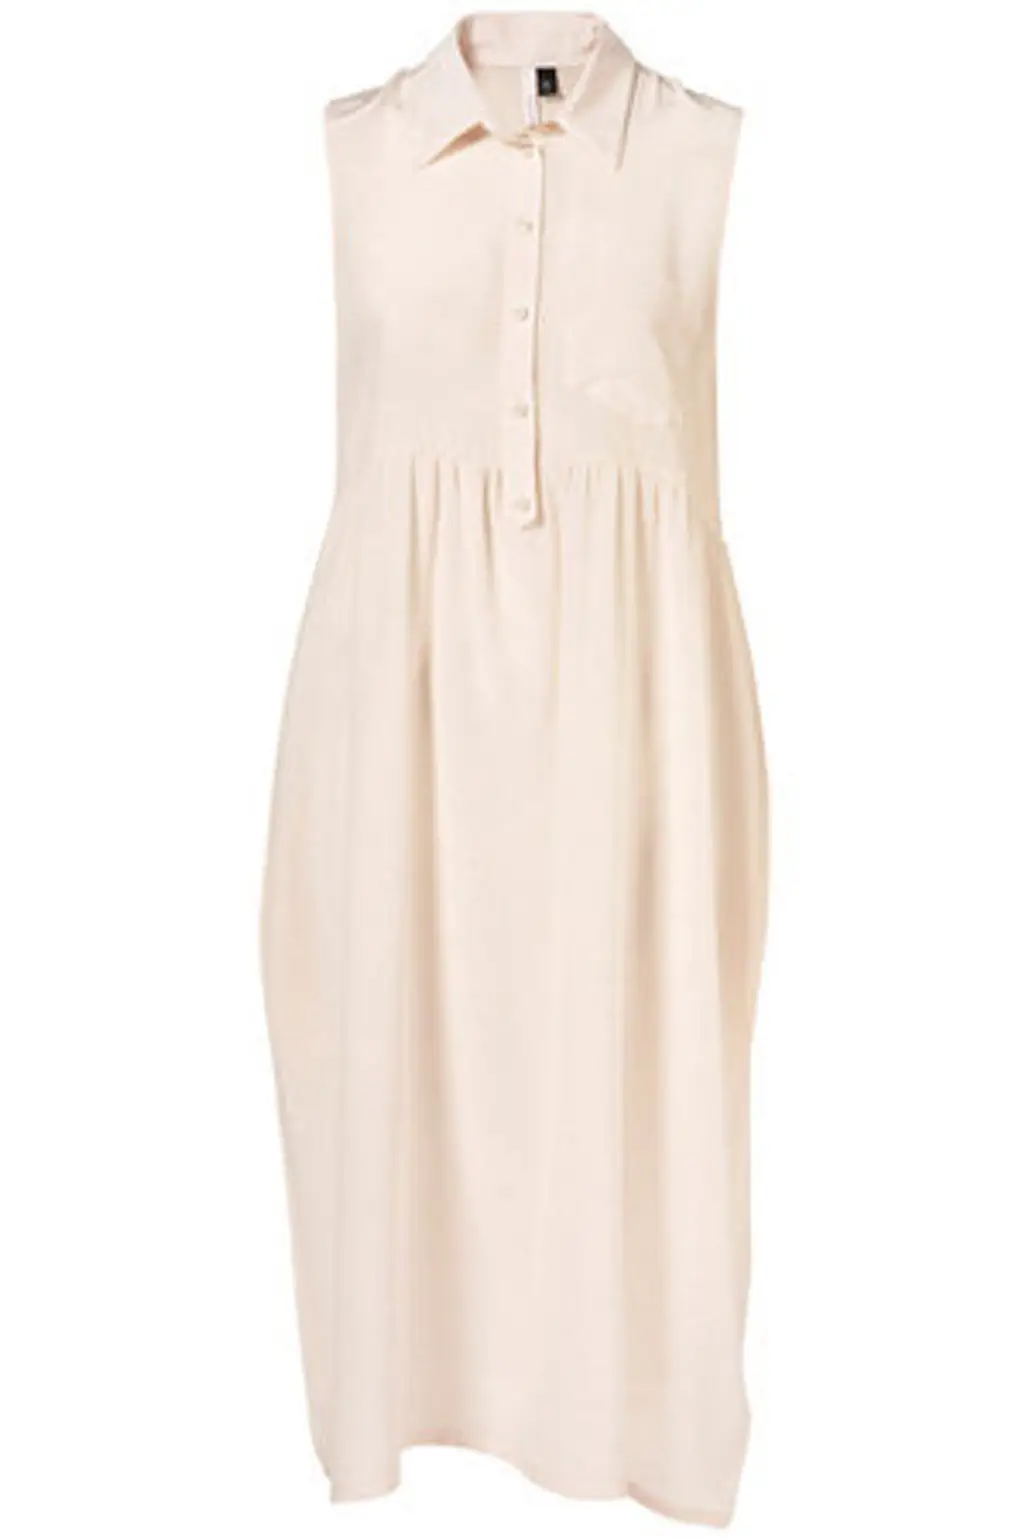 Topshop Ivory Silk Midi Dress by Boutique